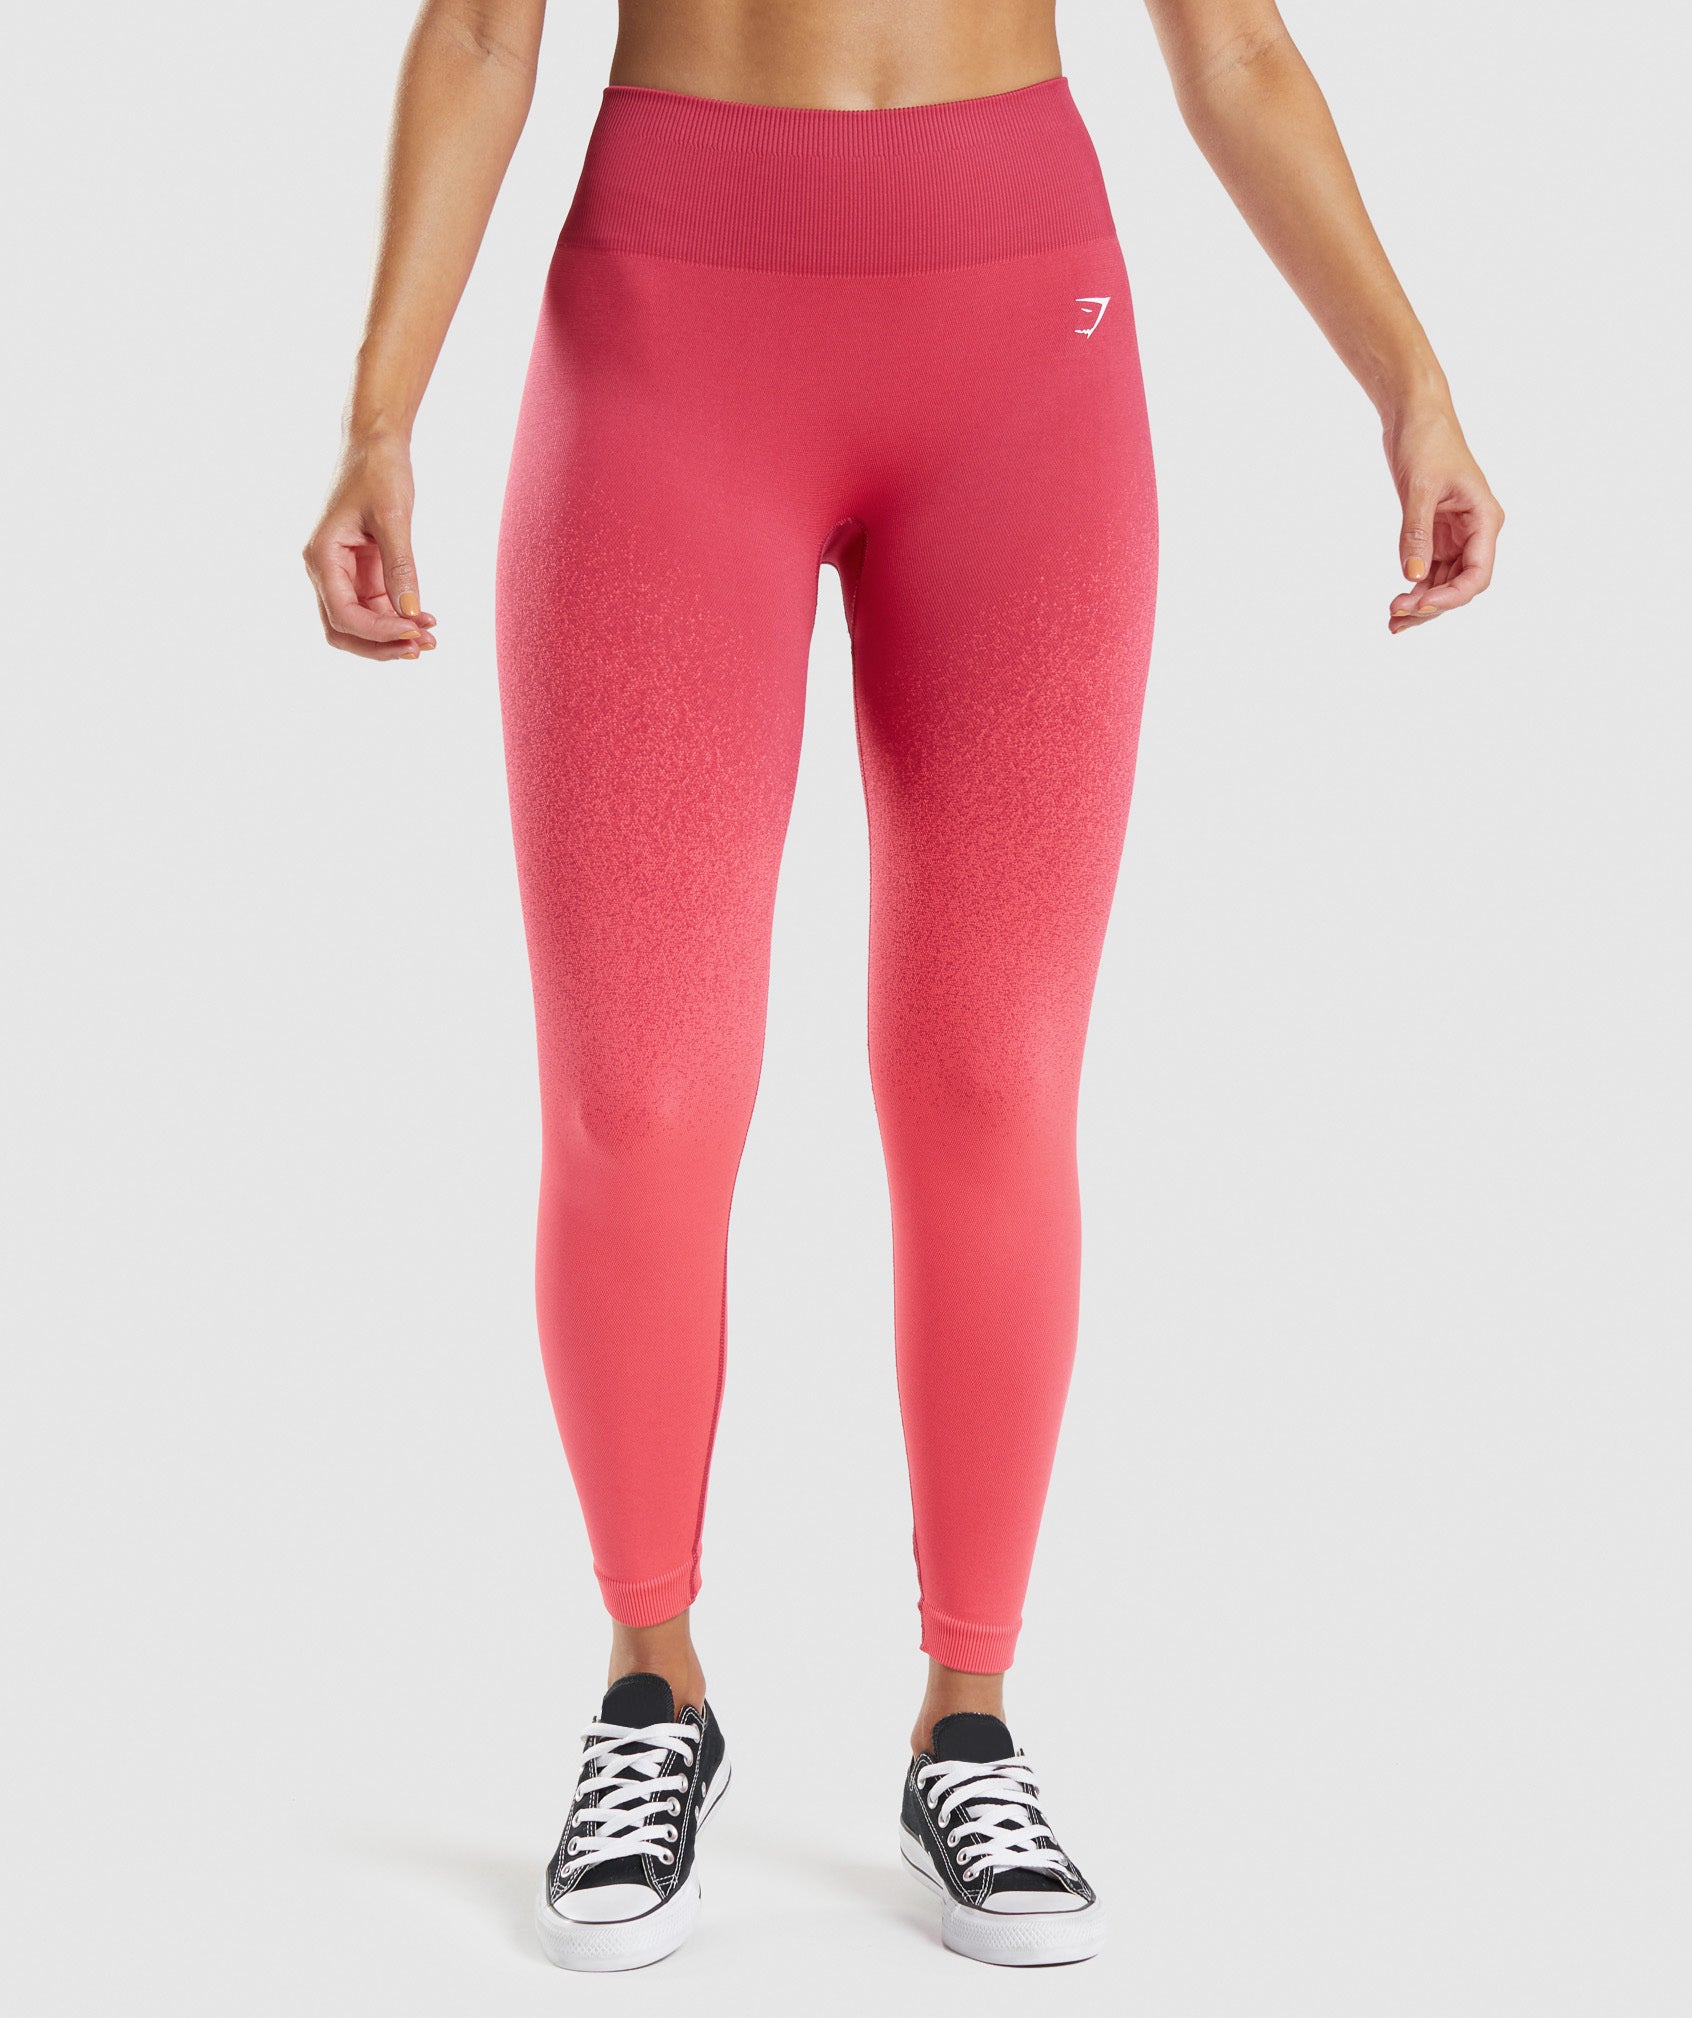 Adapt Ombre Seamless Leggings in Pink/Red - view 1